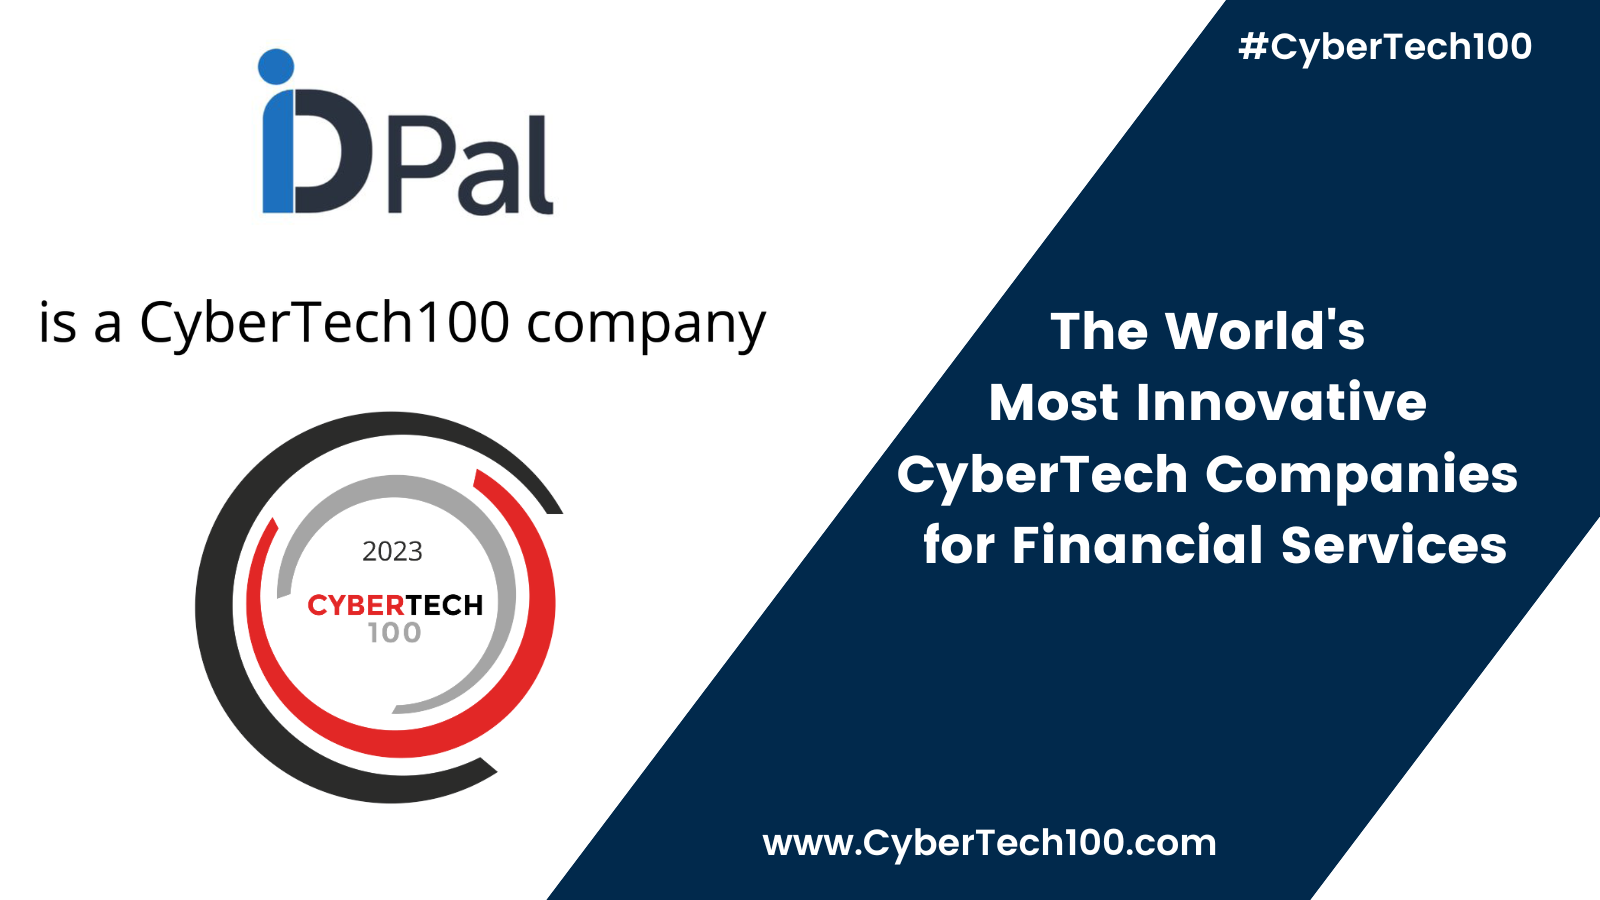 ID-Pal joins CyberTech100 list for 2023